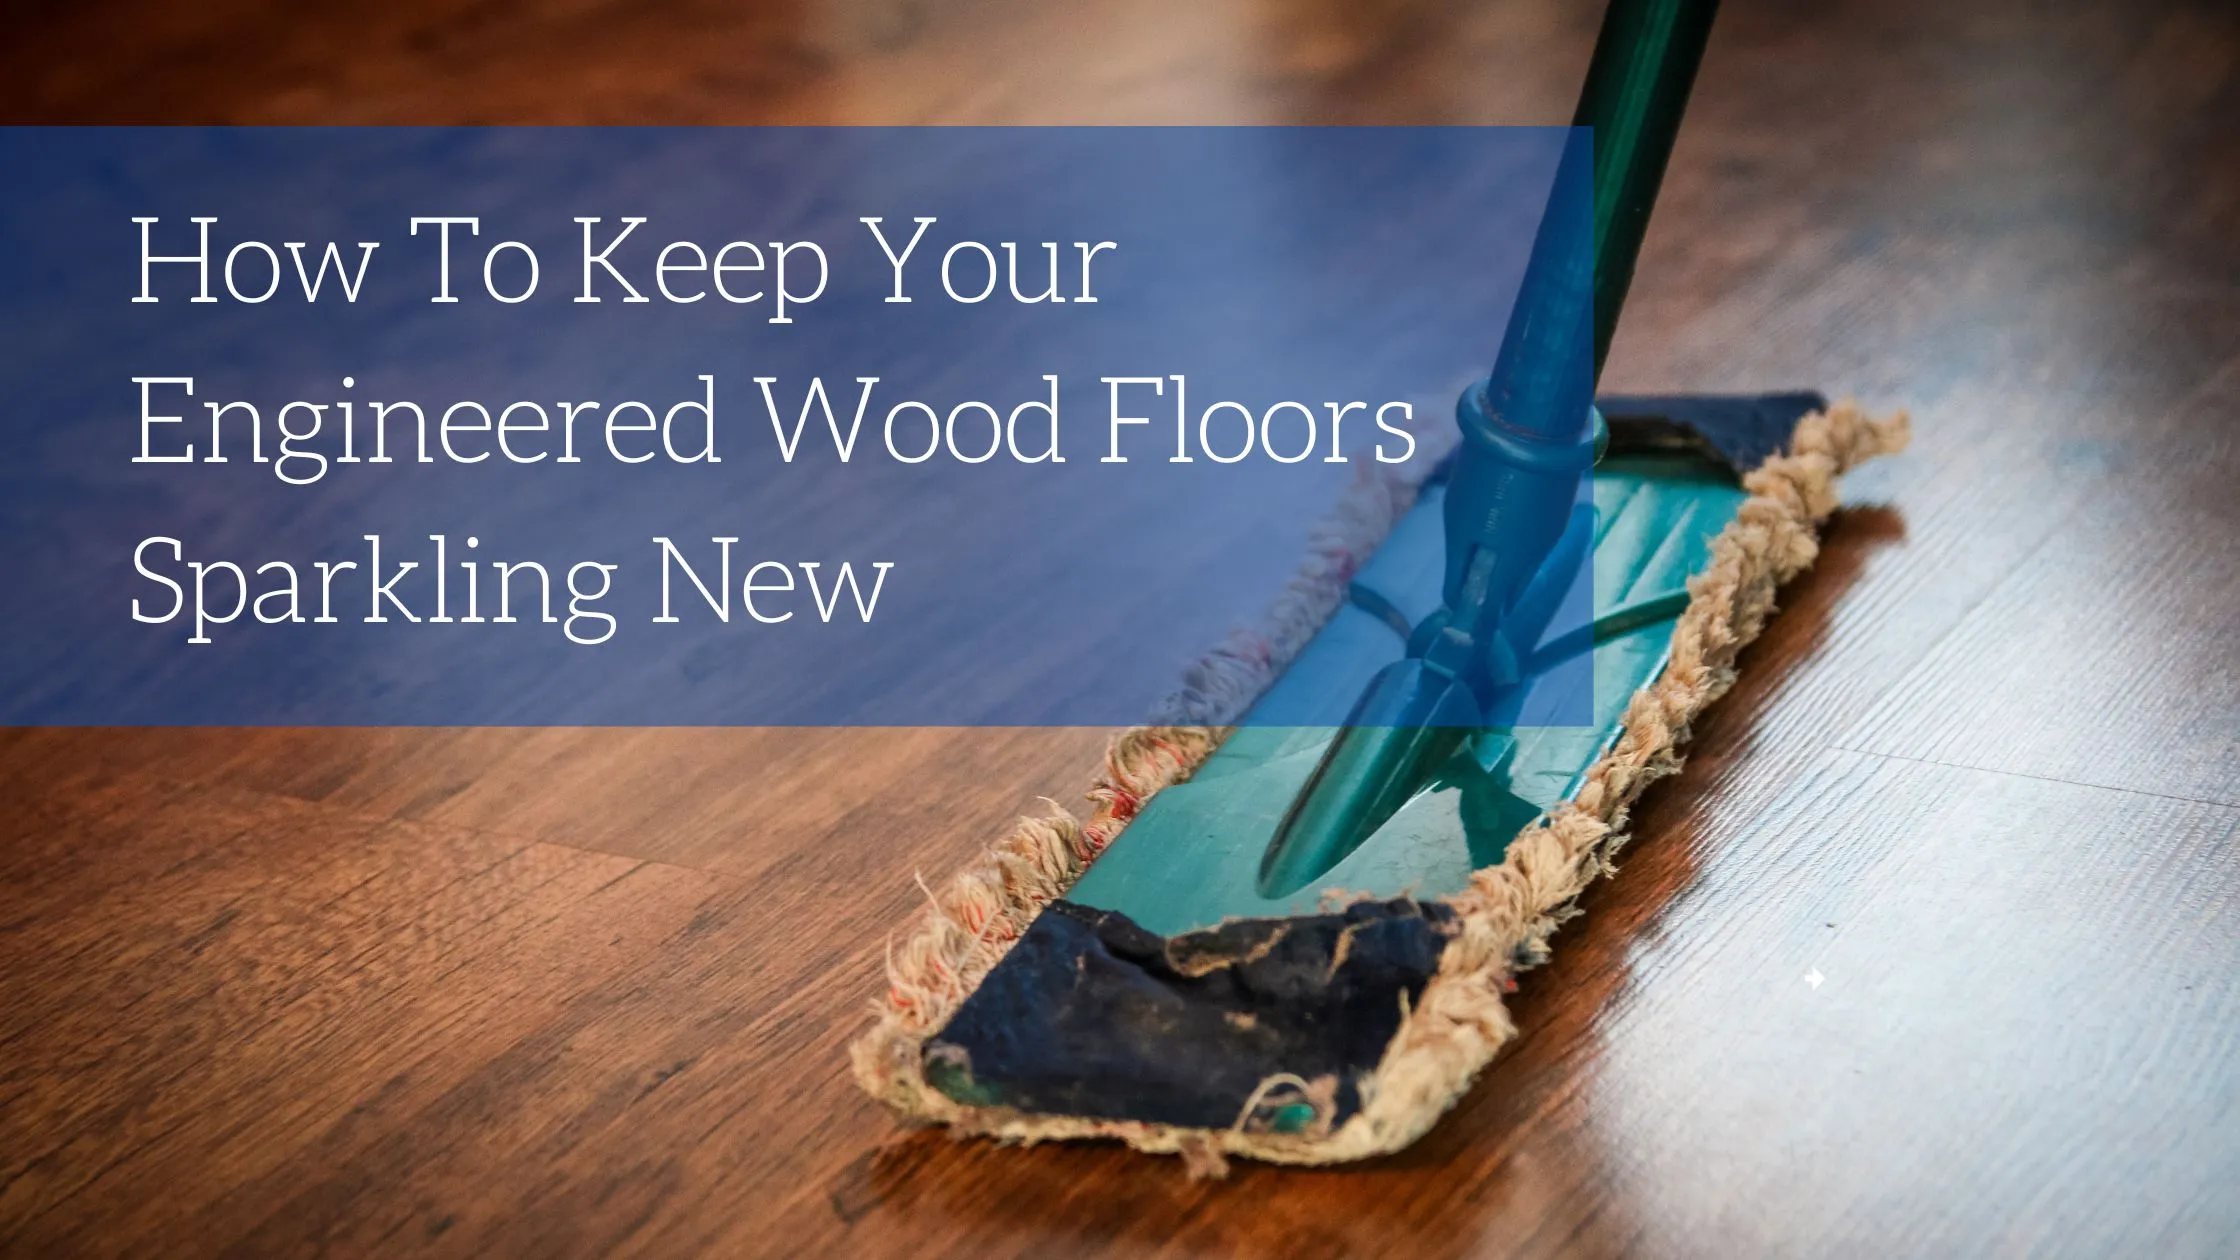 How To Keep Your Engineered Wood Floors Sparkling New